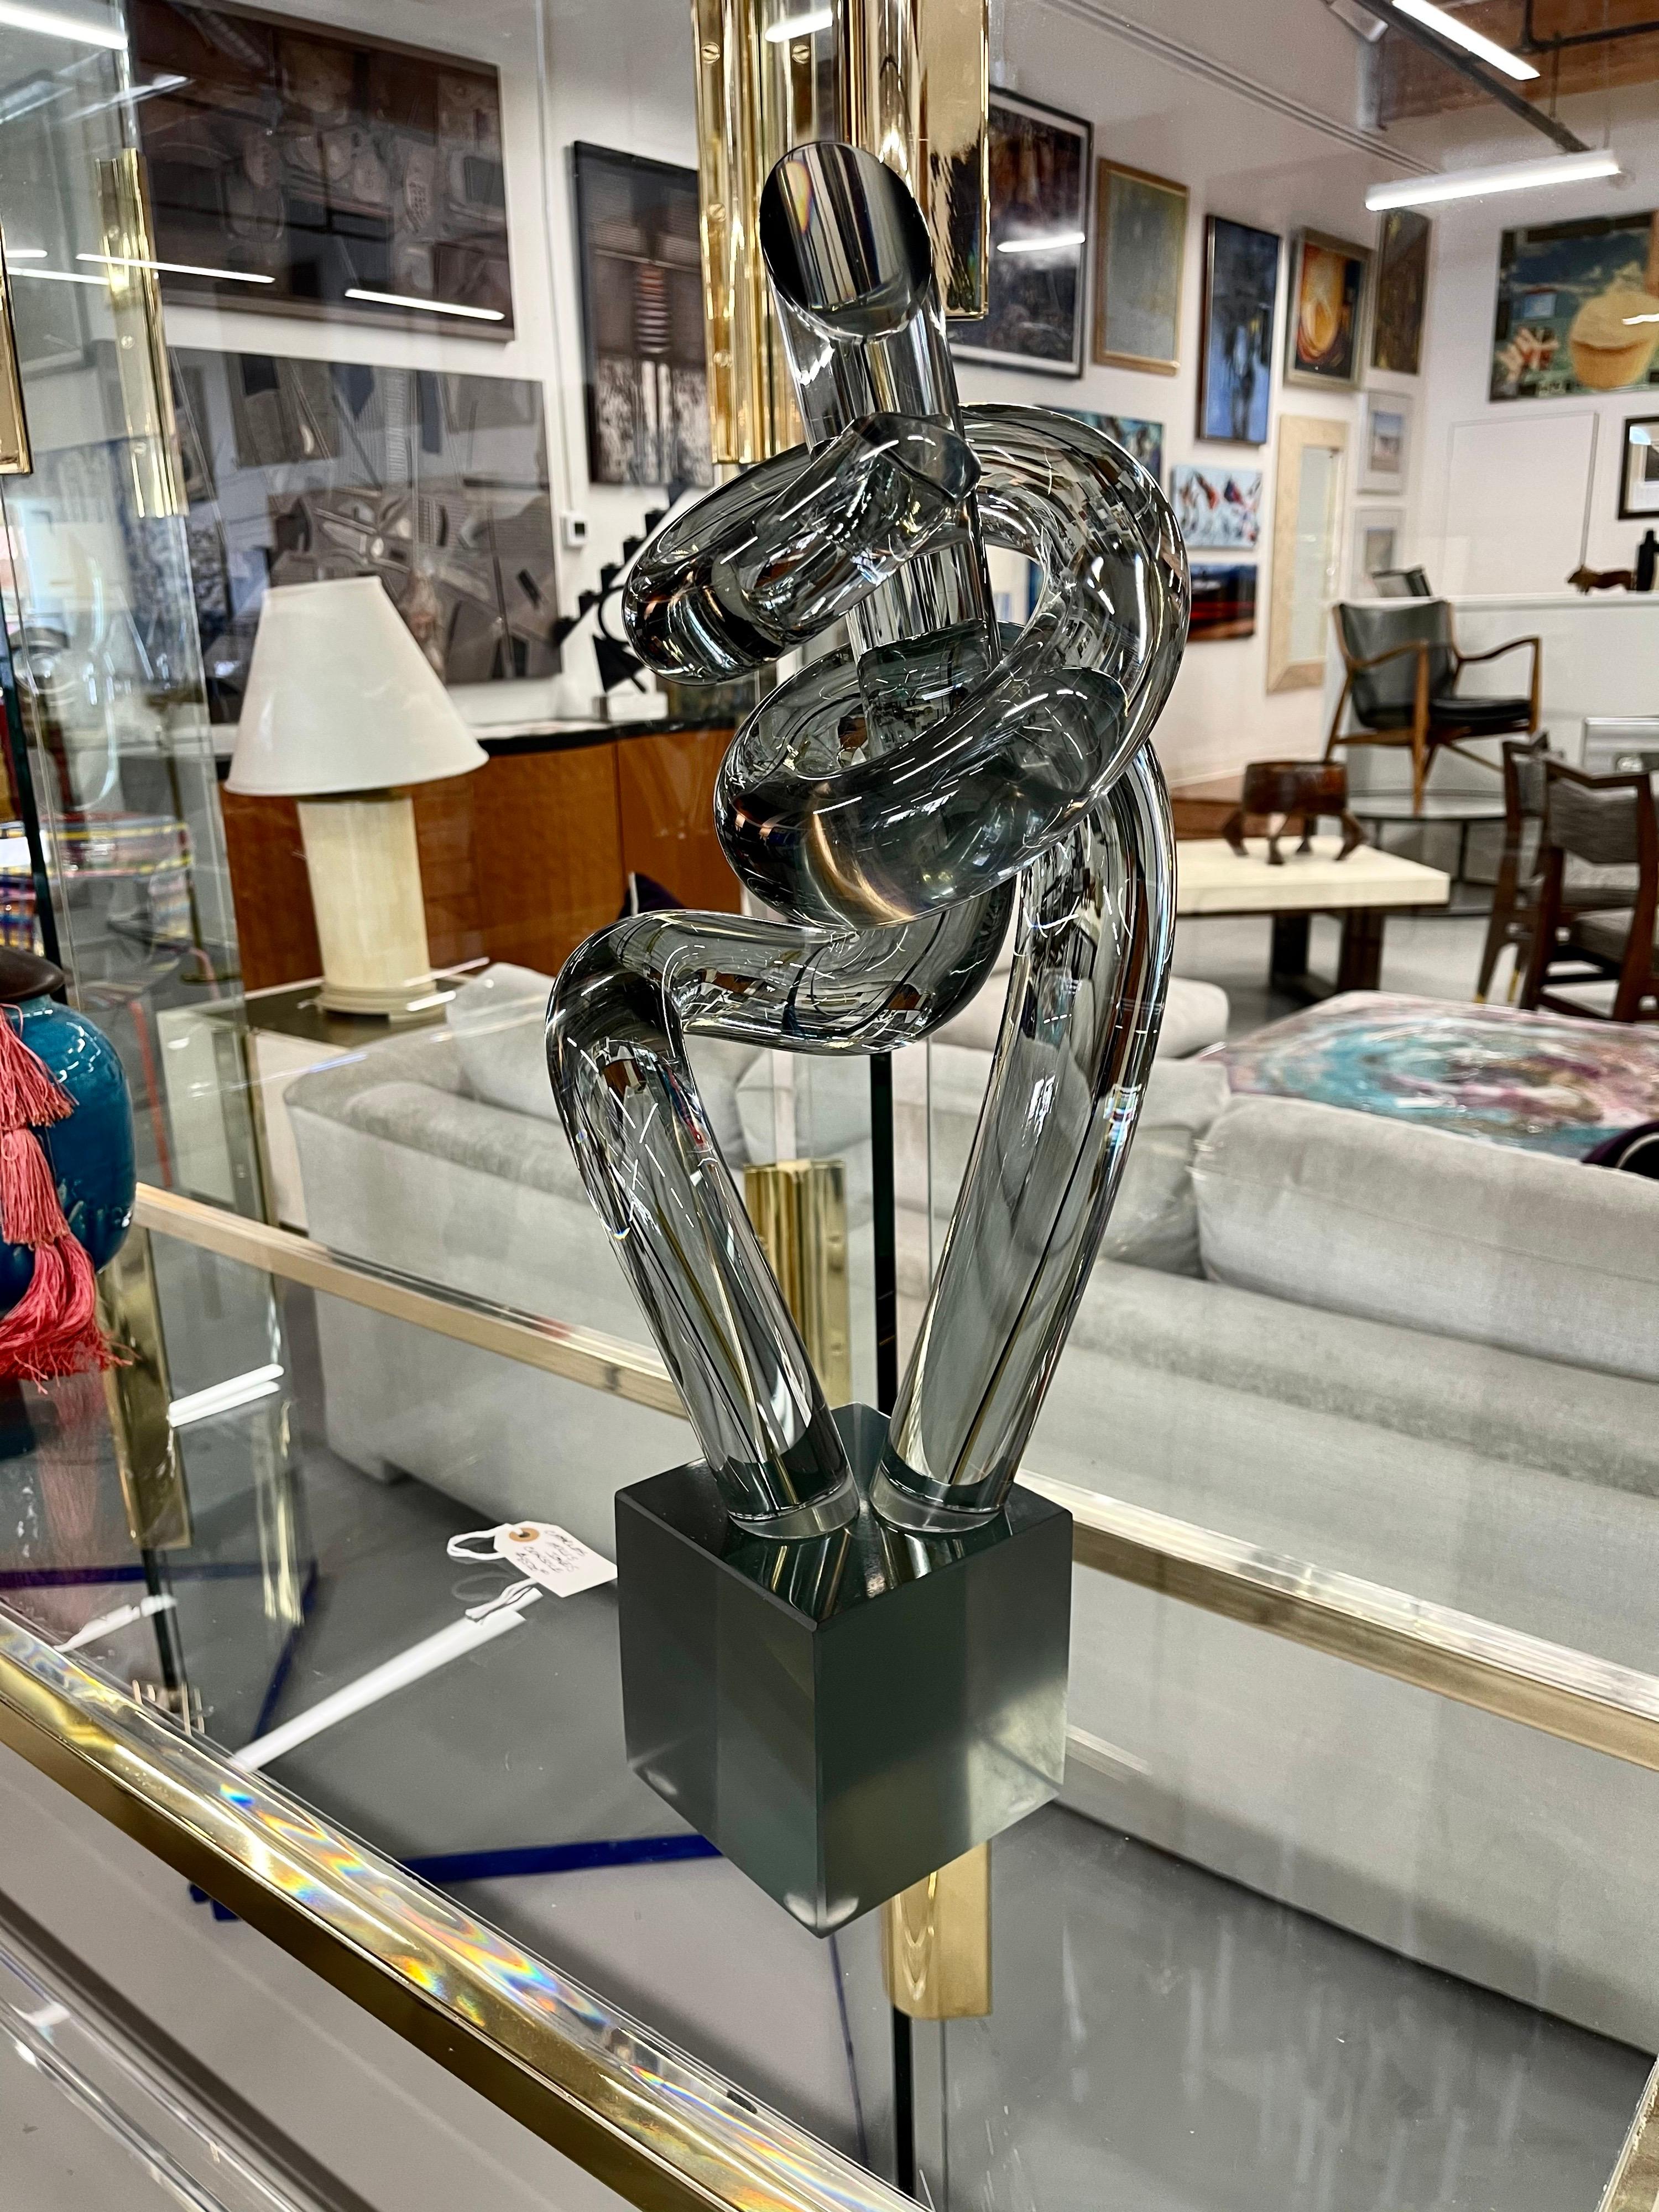 A wonderful smoked glass twisted sculpture by the Italian Master Elio Raffaeli. Approximately 21 inches tall. In good age appropriate condition, with some minor marks on the base.